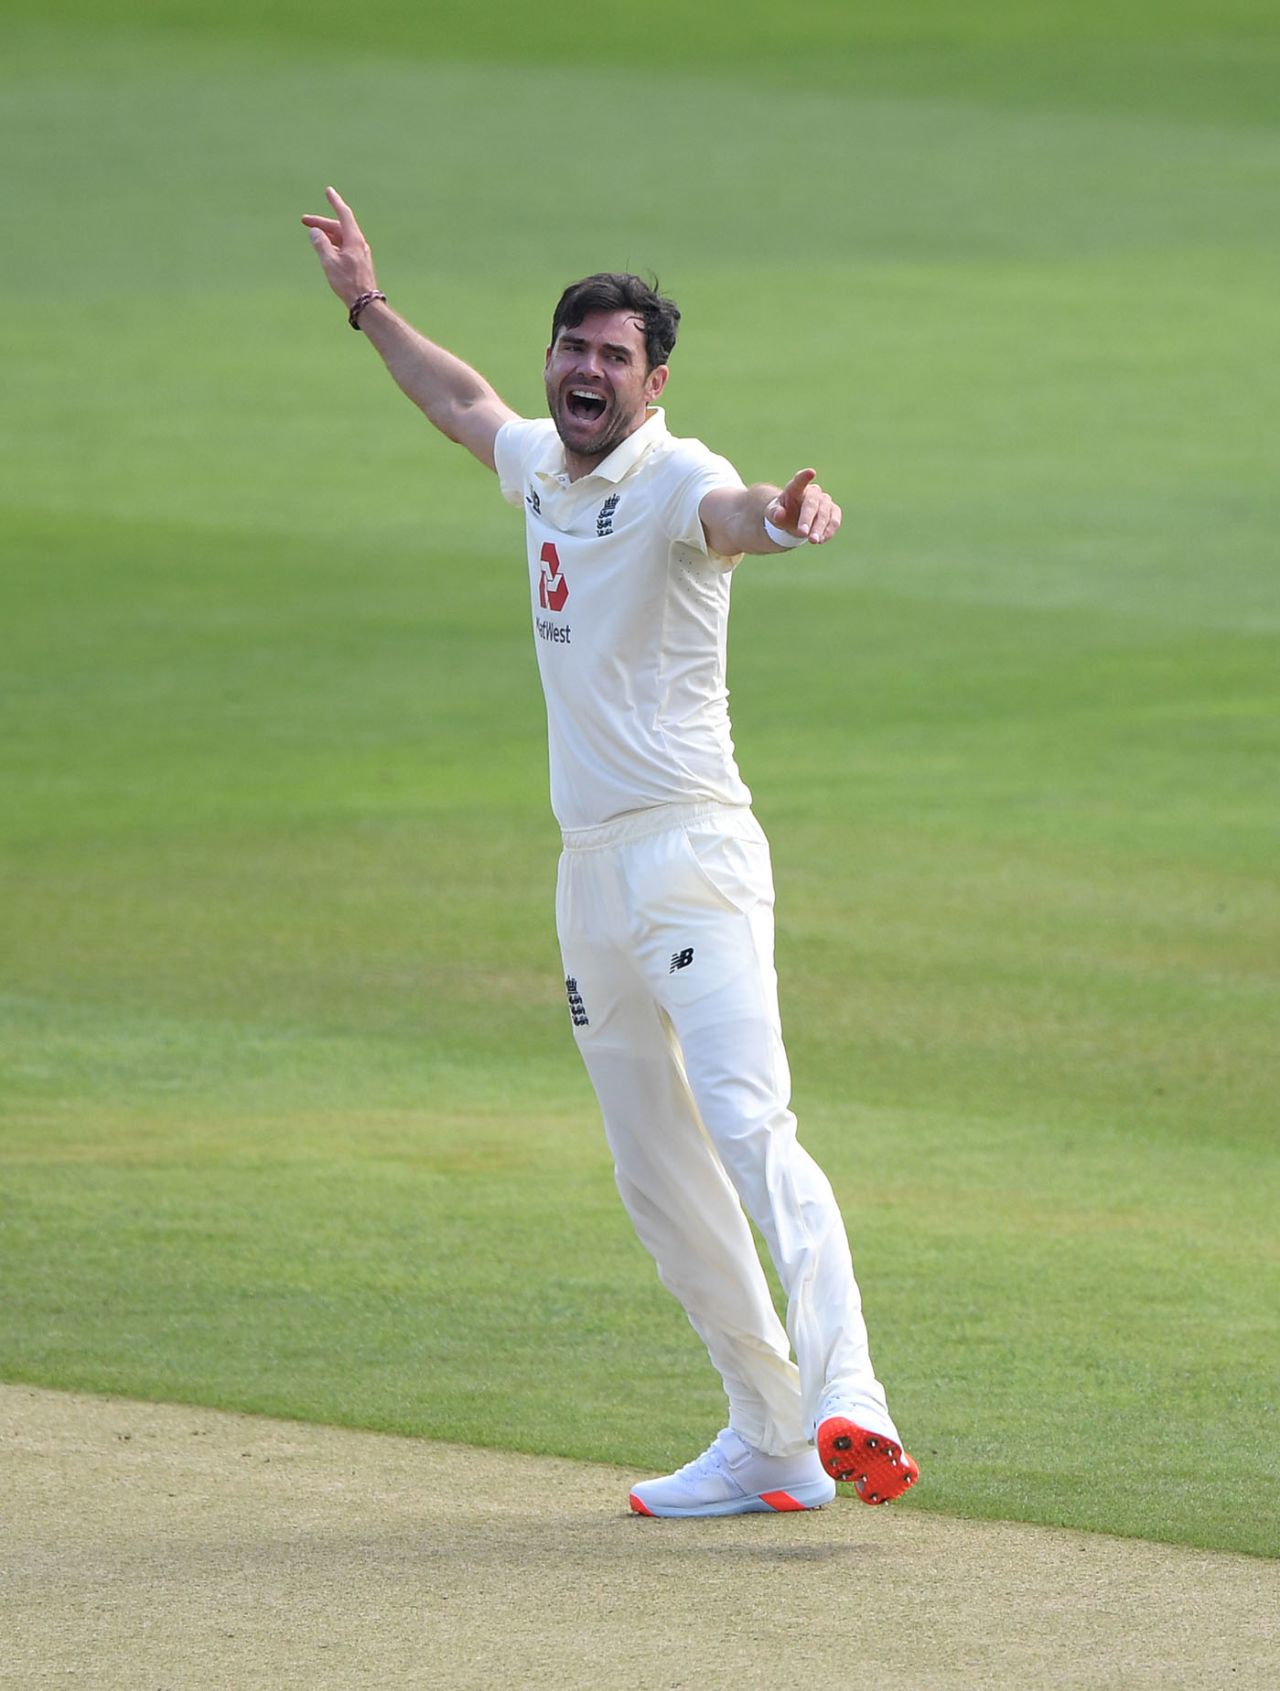 James Anderson celebrates the wicket of Shan Masood, England v Pakistan, Ageas Bowl, 2nd Test, 1st day, August 13, 2020